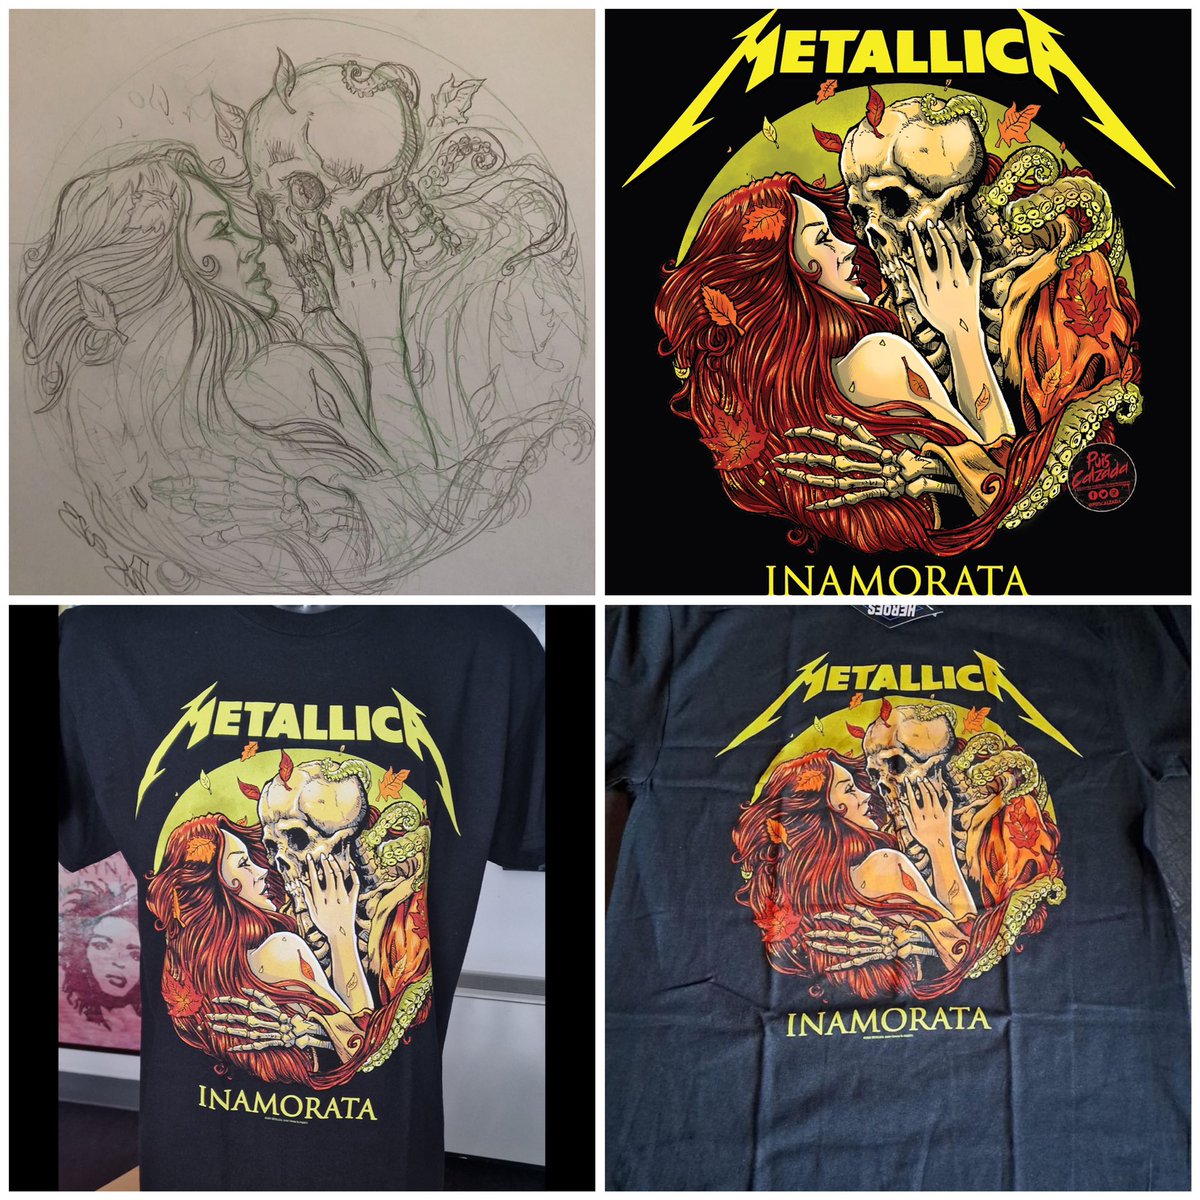 Evolution of my Metallica “Inamorata” Design… Sorry for the spam, but i’m really happy and proud of it.. #metallica #inamorata #inamoratametallica #officialmerchandise #officialtshirt #officialart #puishorrorartist  #puisillustrator #puiscalzadaart